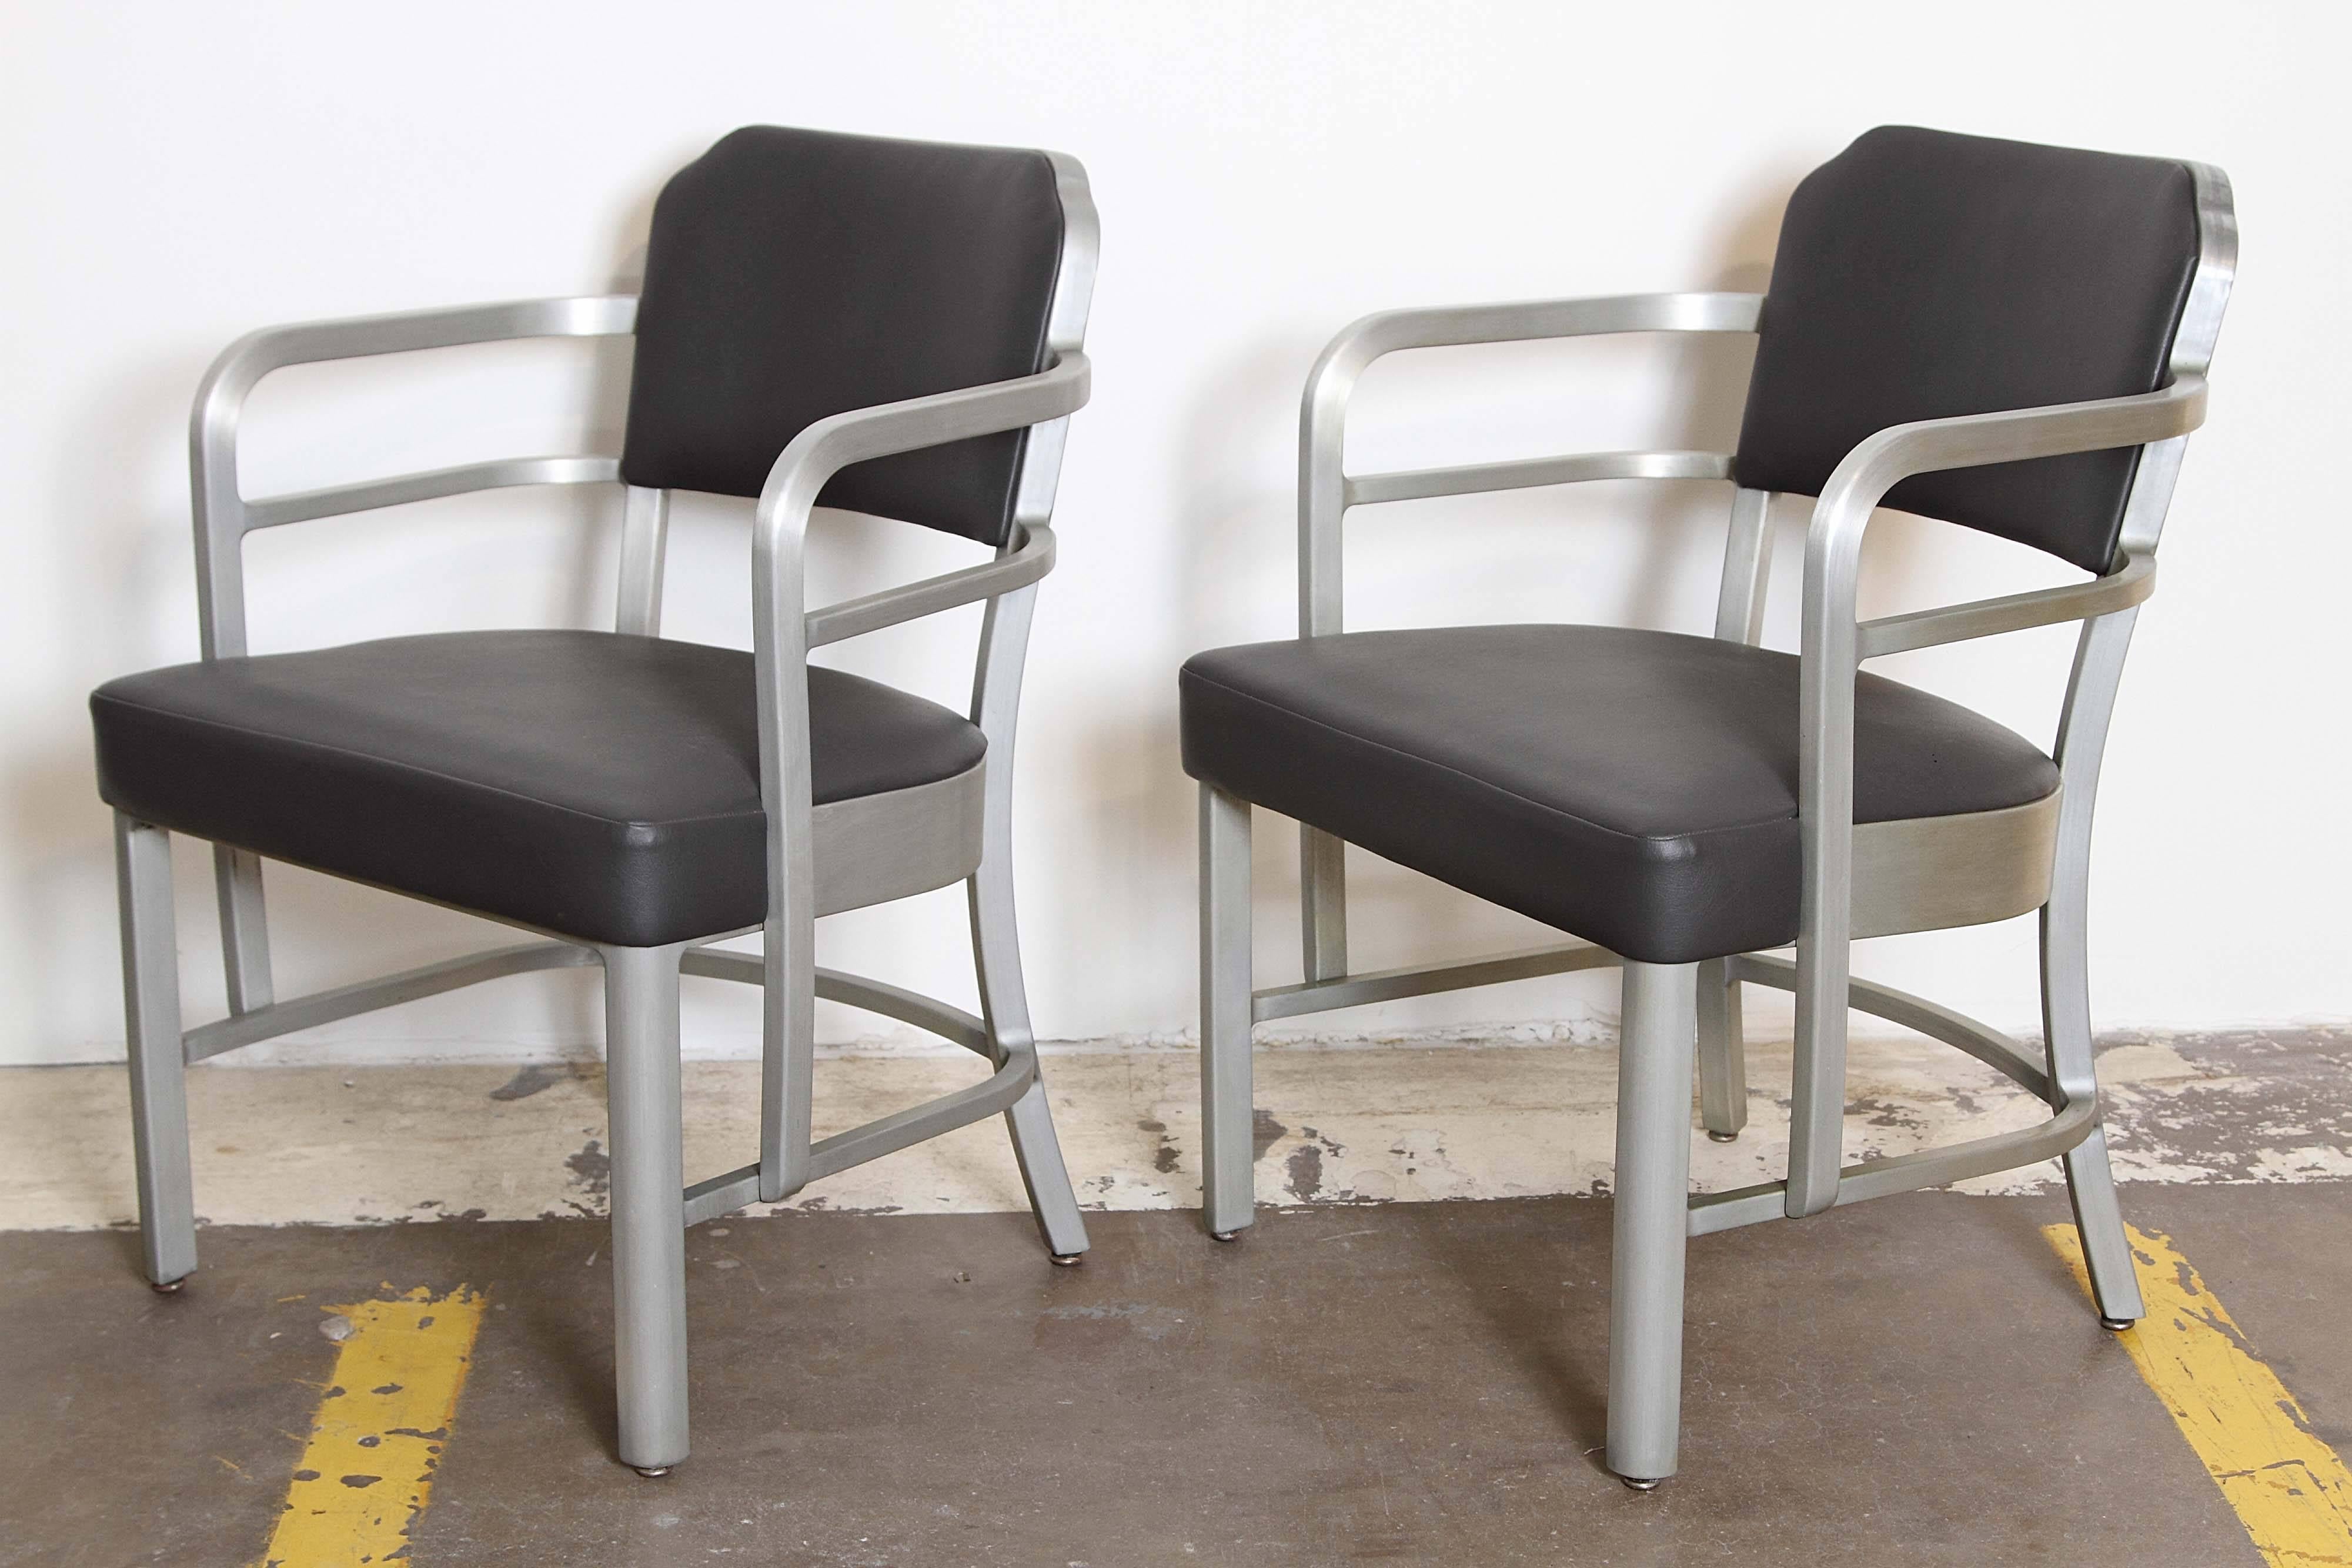 Extreme Machine Age Art Deco GoodForm Armchairs Lounge Chairs
Brushed Aluminum, Leather, good form

Original brushed finish lightly polished, recovered in charcoal grey leather.
Vintage general fireproofing GoodForm metal tags.
Uncommon splayed back